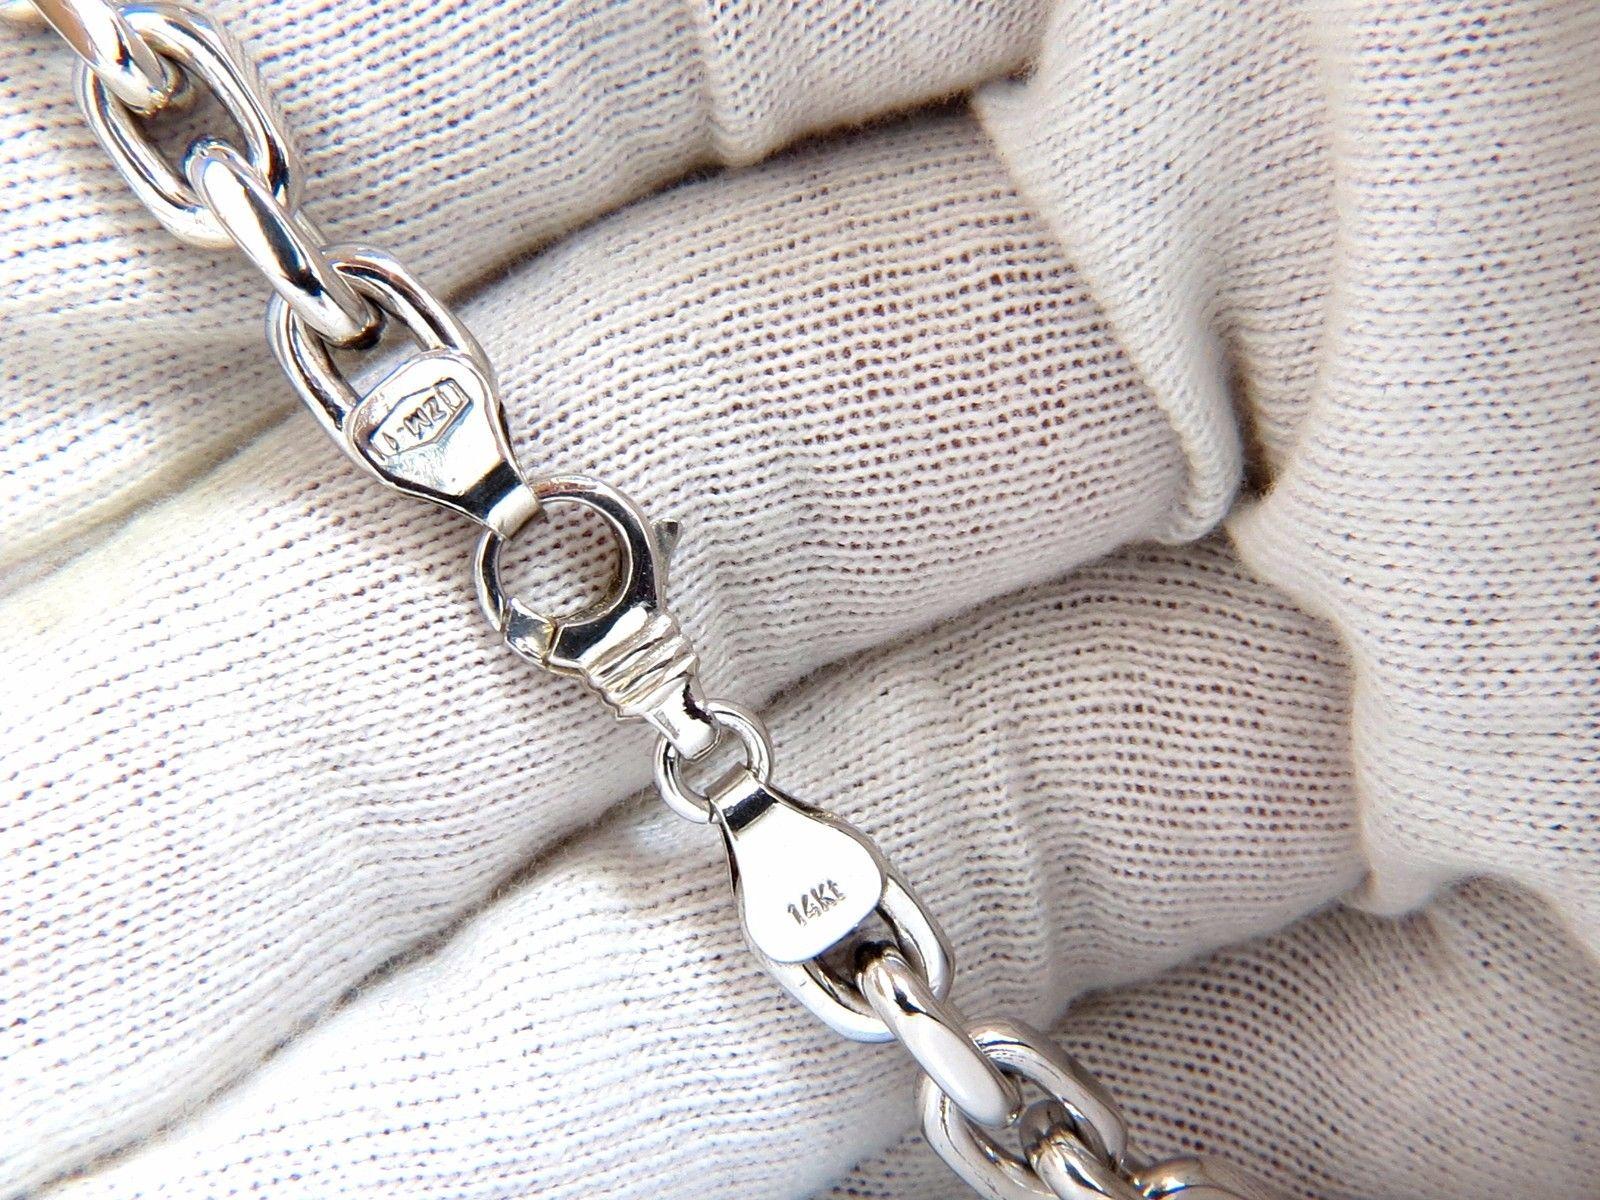 Unisex Solid Chain Link Bracelet.

Solid, not hollow links.

6.7mm diameter

8 inch long (wearable length)

39.3 Grams  & Durable.

Marked 